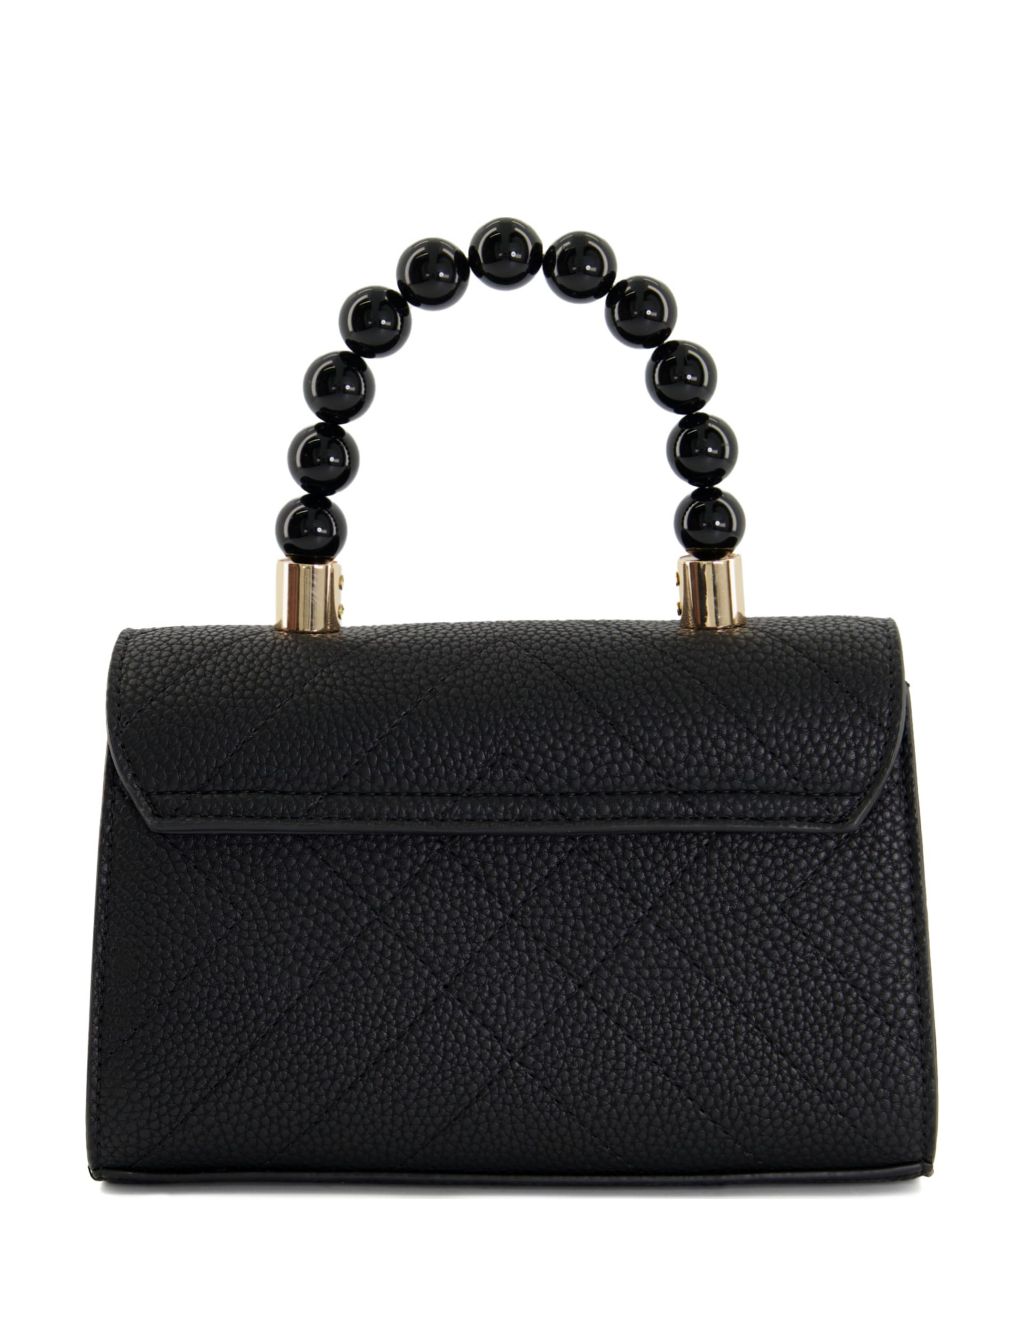 Faux Leather Quilted Mini Cross Body Bag image 4